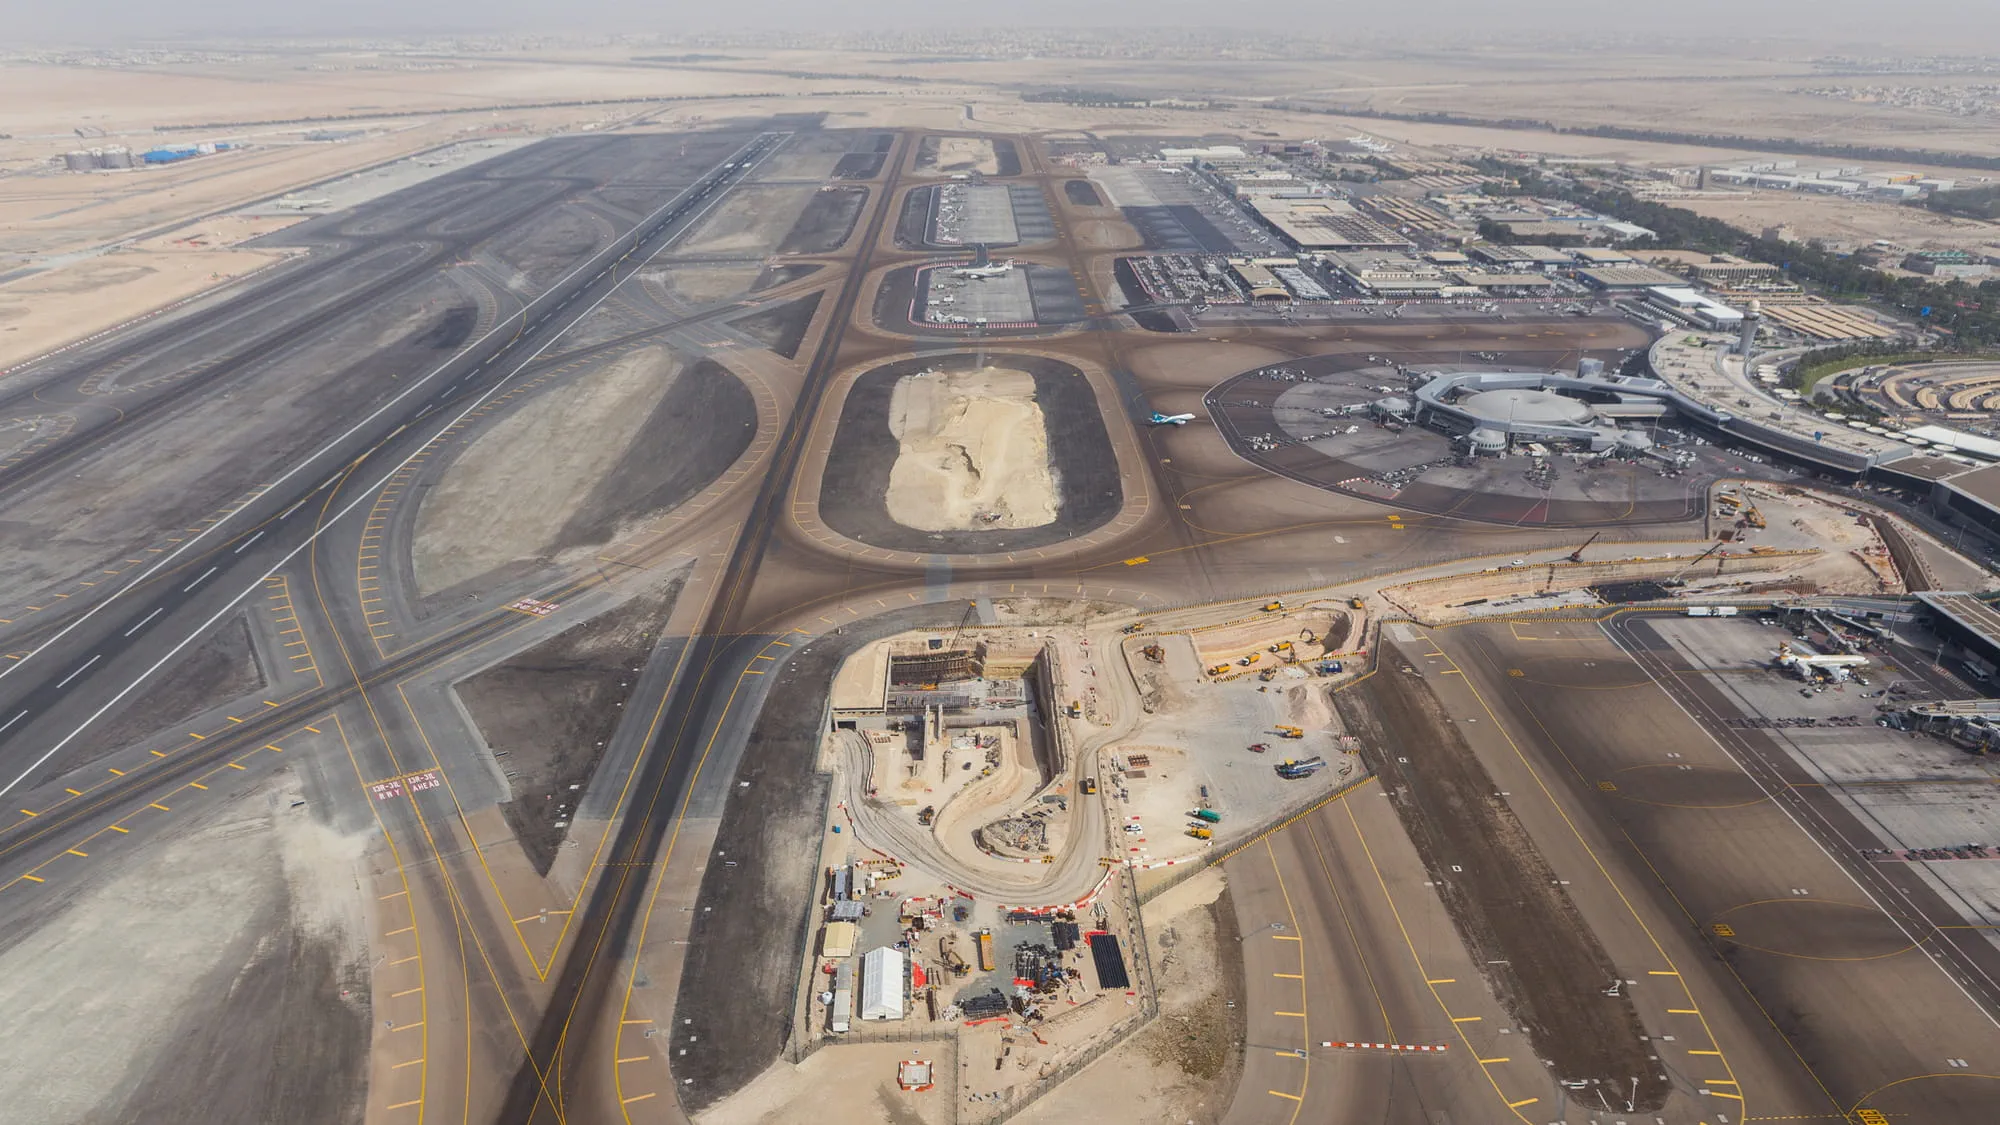 Aerial view of the airport during construction phase. Credit: ADAC.